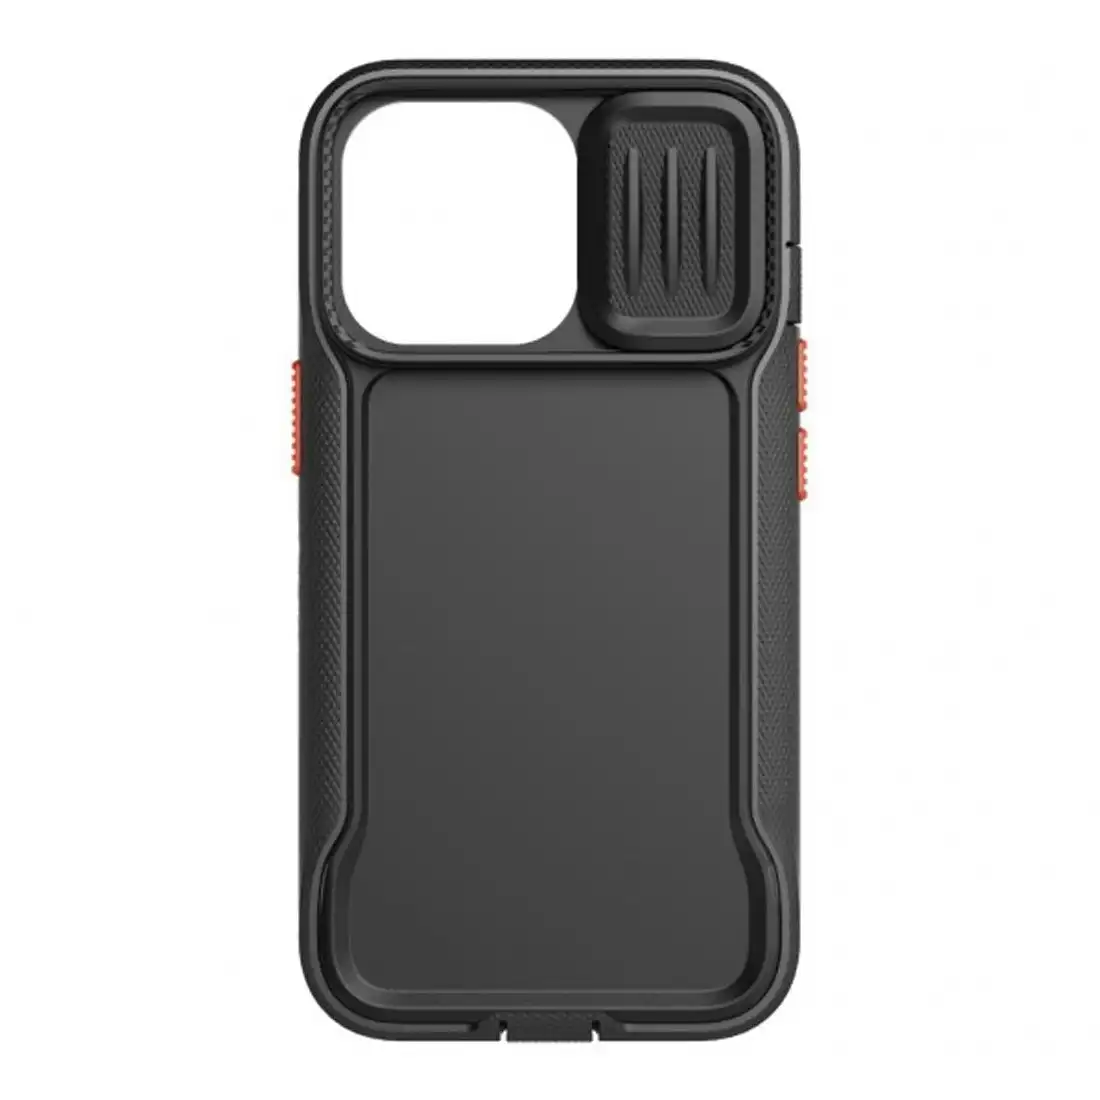 Tech21 EvoMax Case w/ Holster for iPhone 13 Pro T21-9202 - Off Black